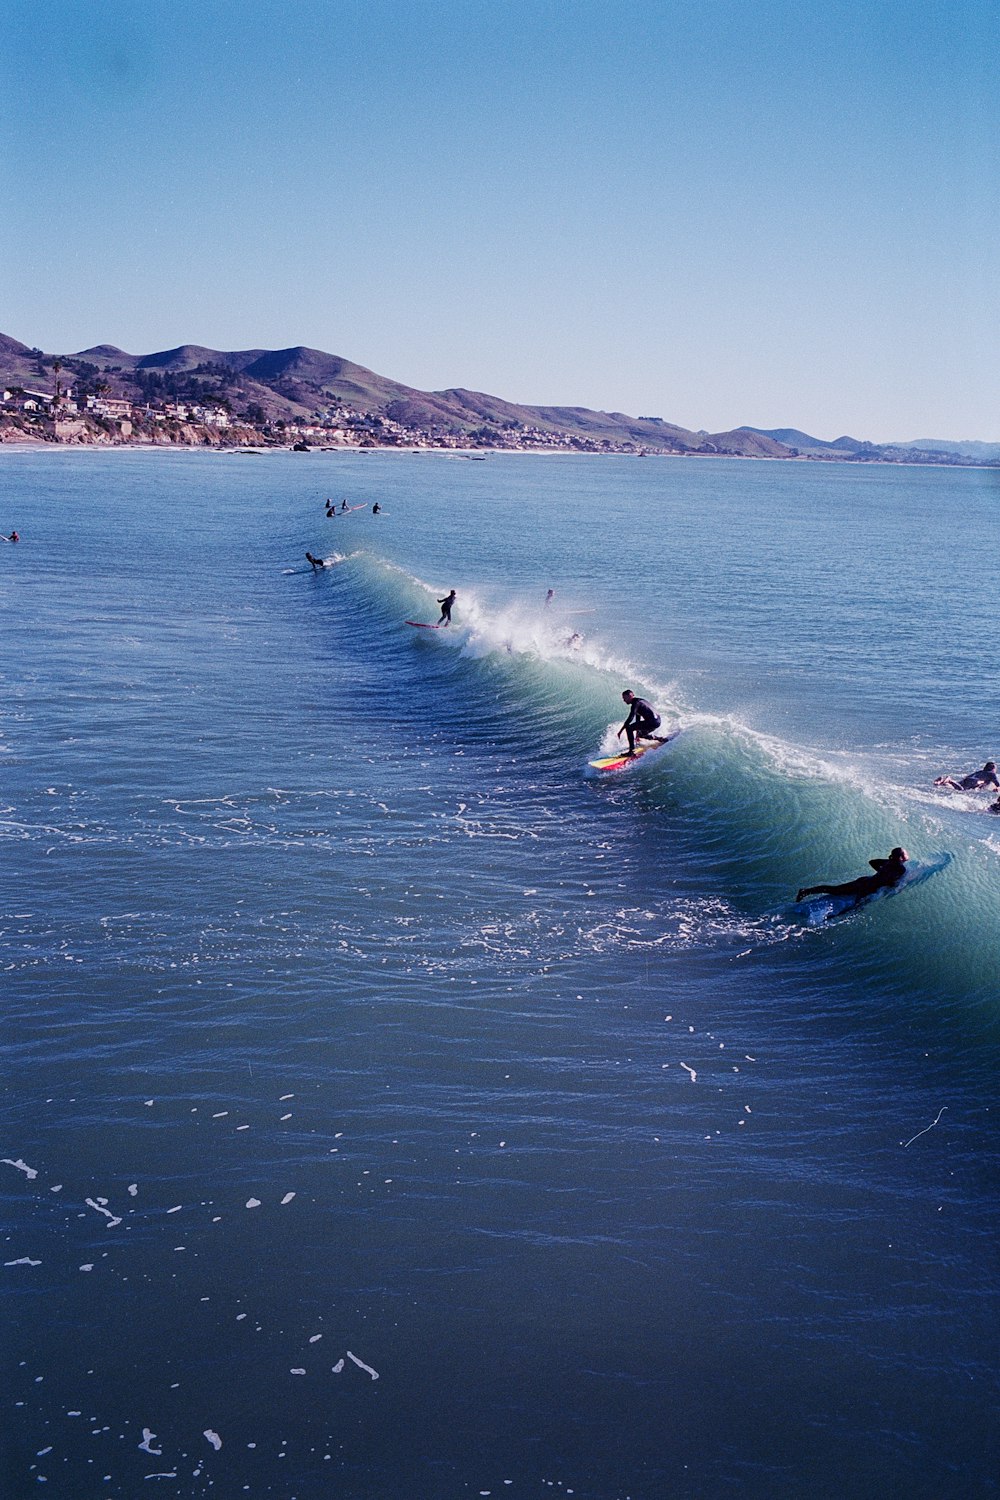 people surfboarding during daytime